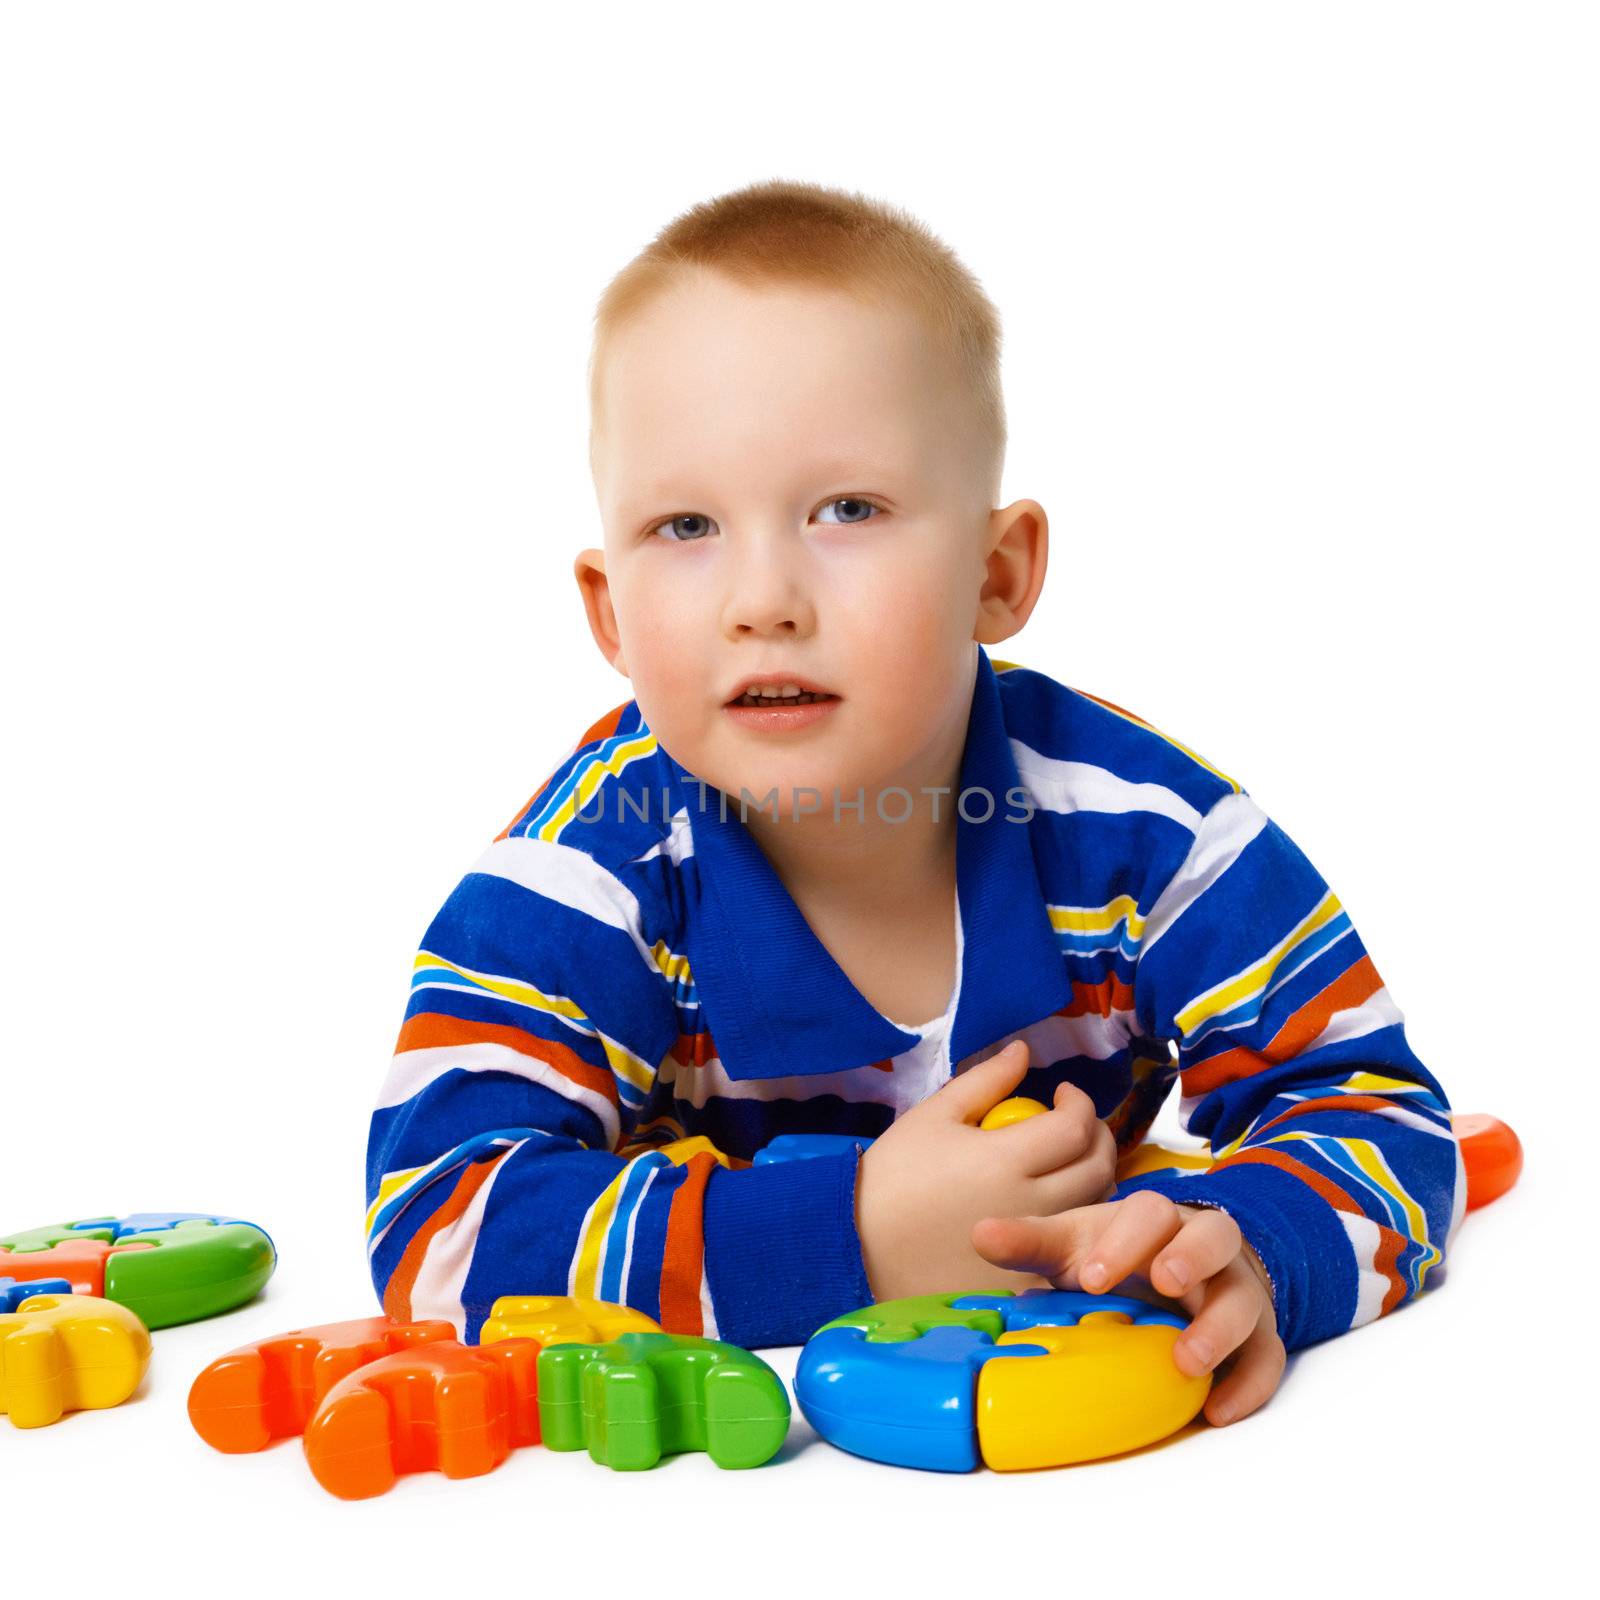 A little boy with color toys isolated on white background